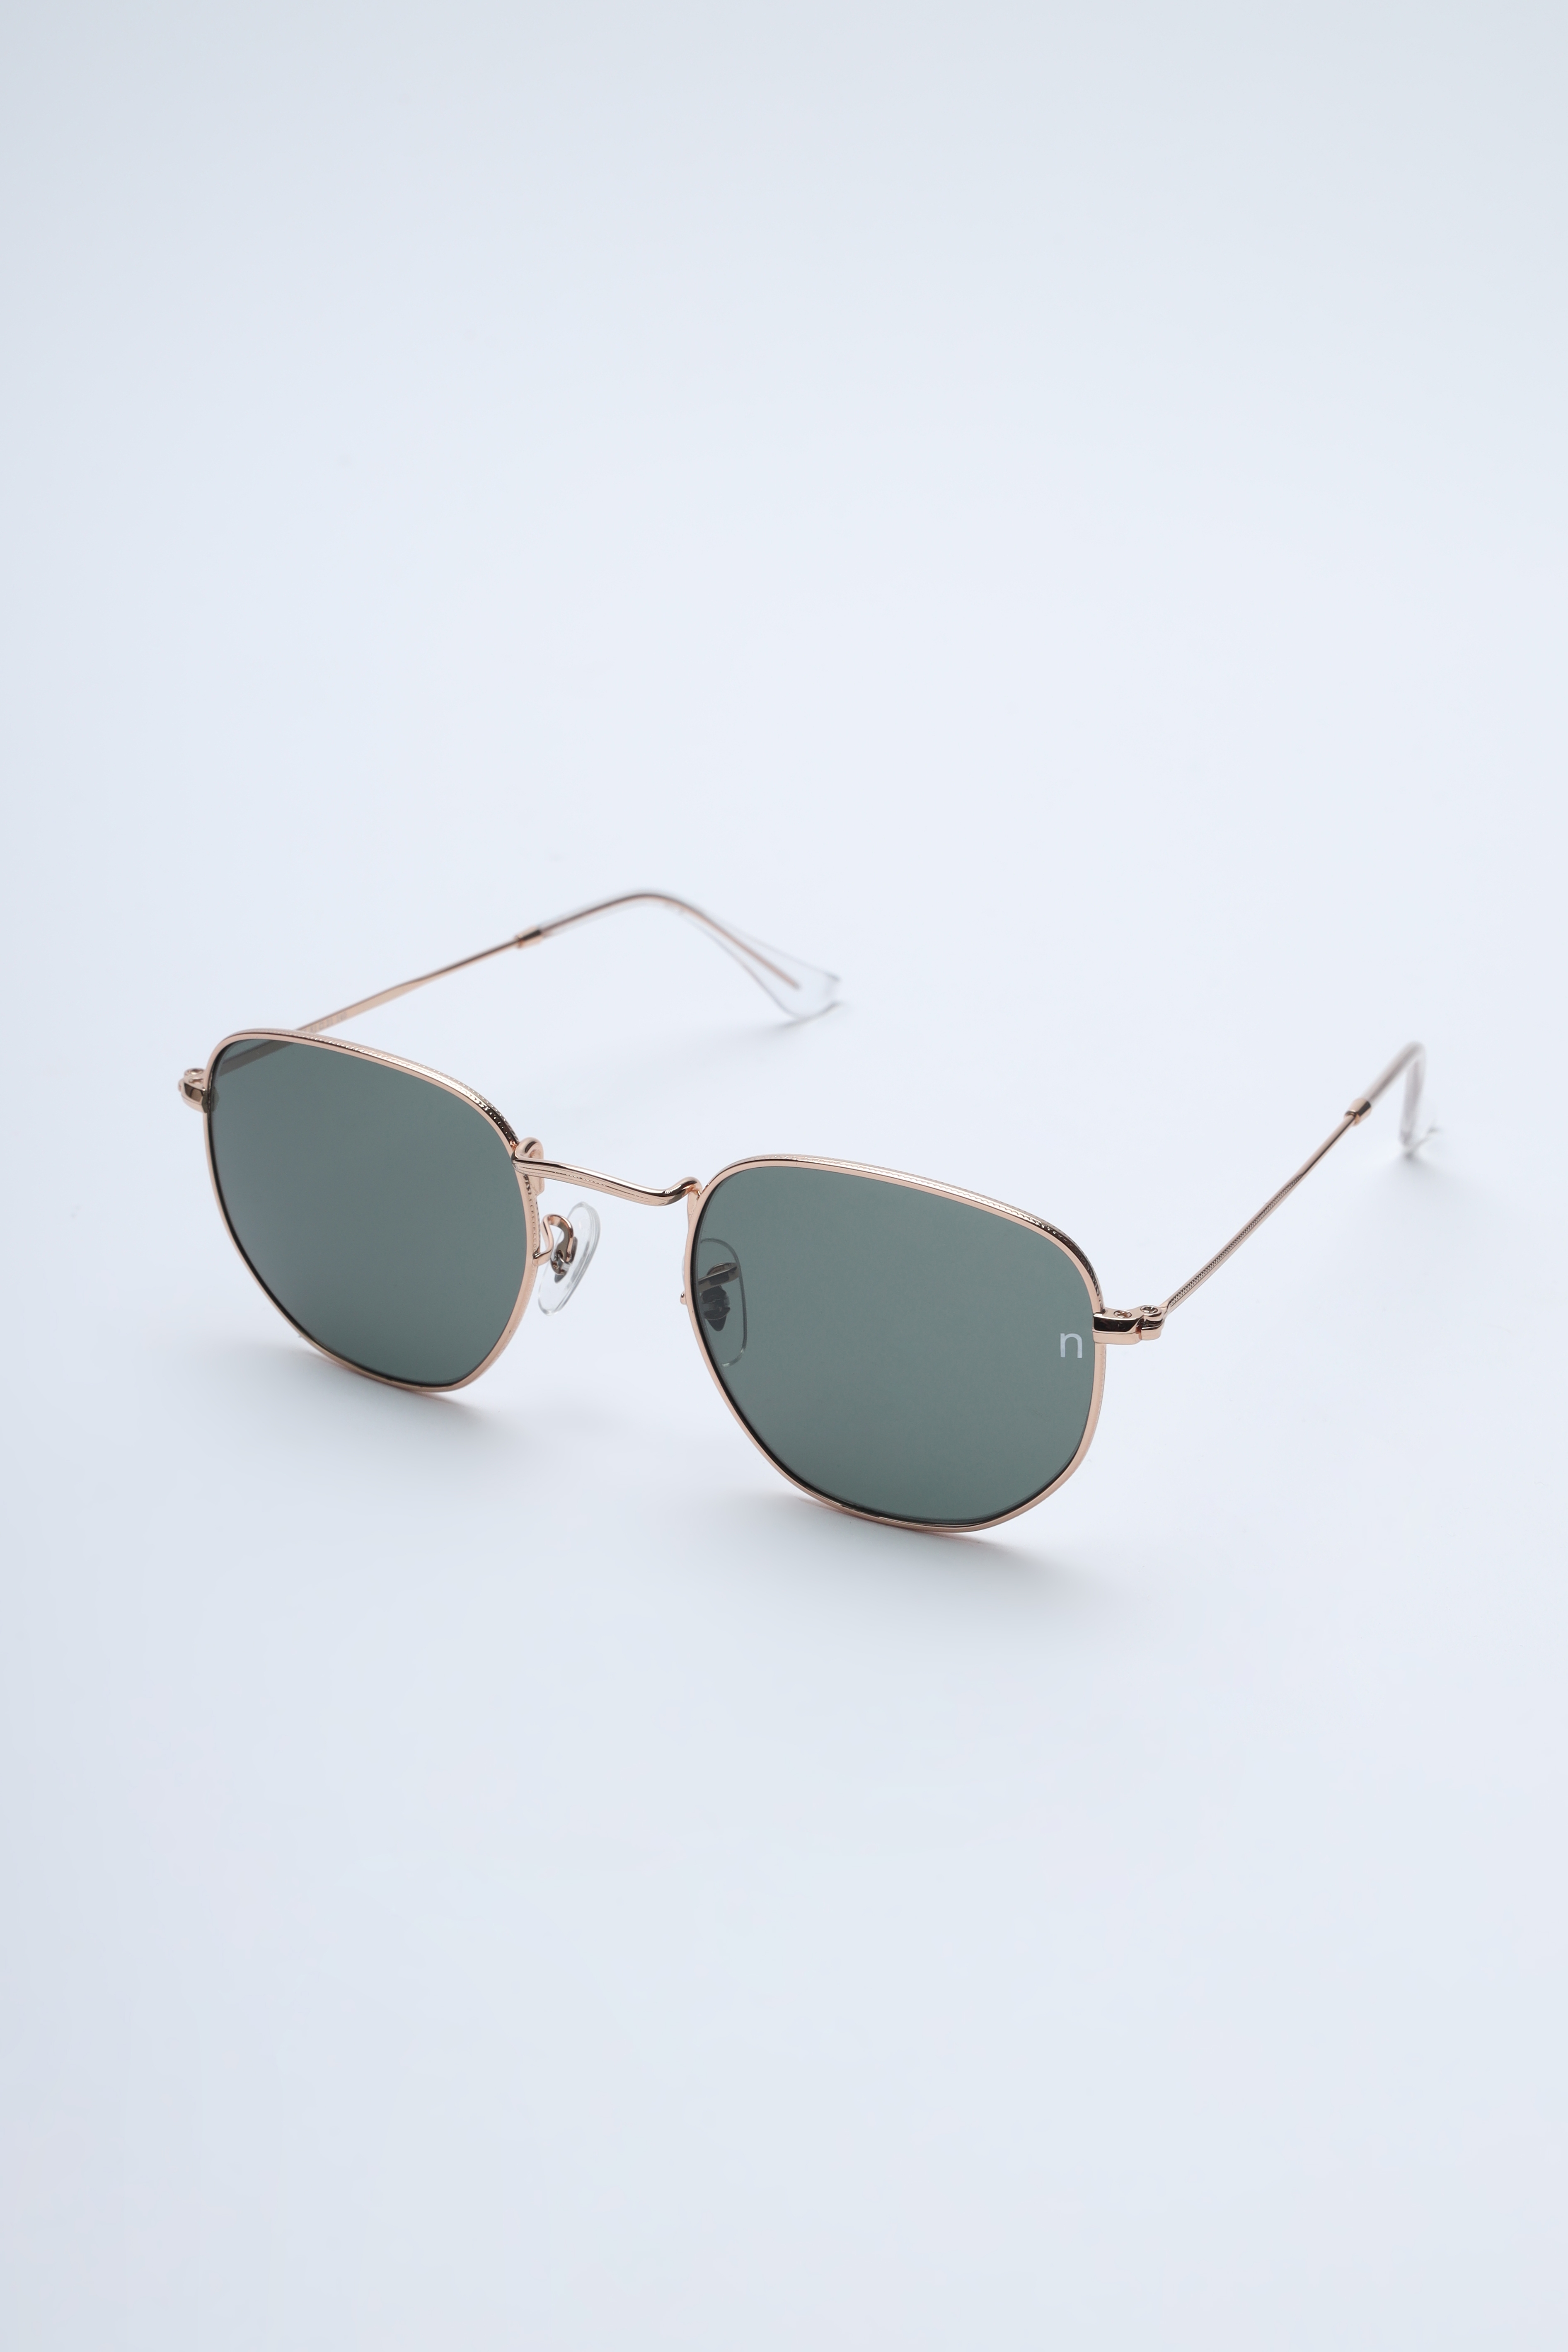 Noggah | Noggah Stainless Steel Gold Frame with Green Glass UV Protection Lens  Medium Size Unisex Sunglasses 